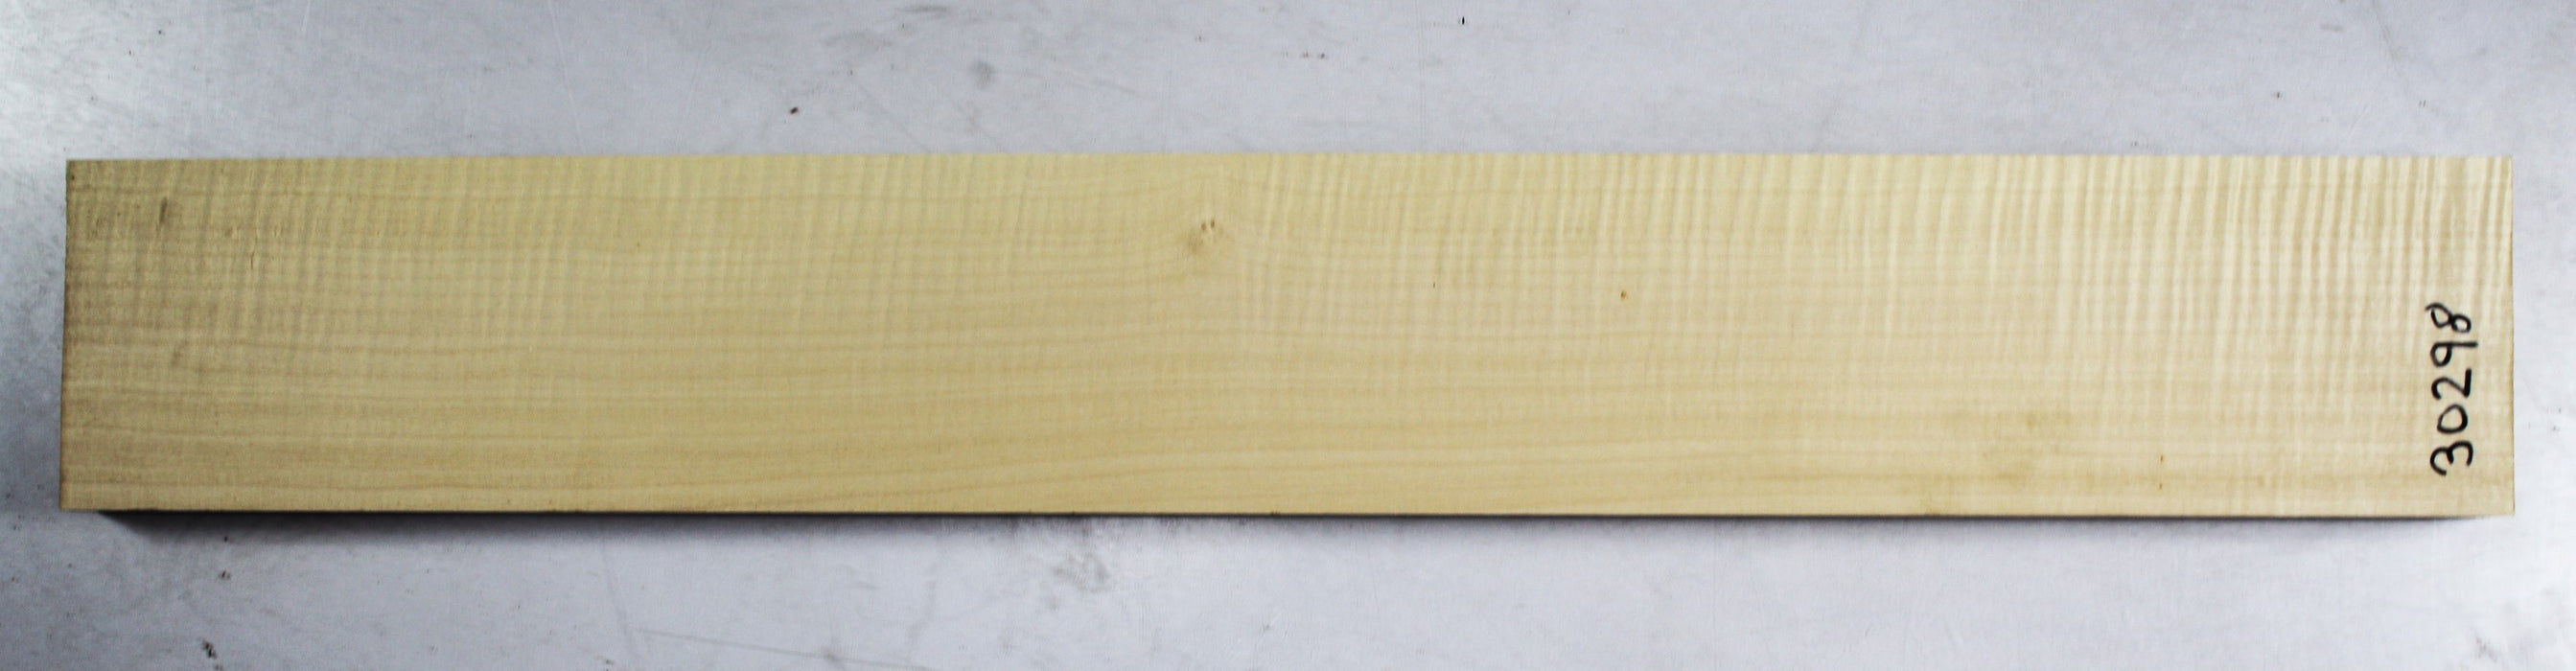 Maple Flame neck blank (2A)  35" x 5" x1.08" - Stock# 3-0298